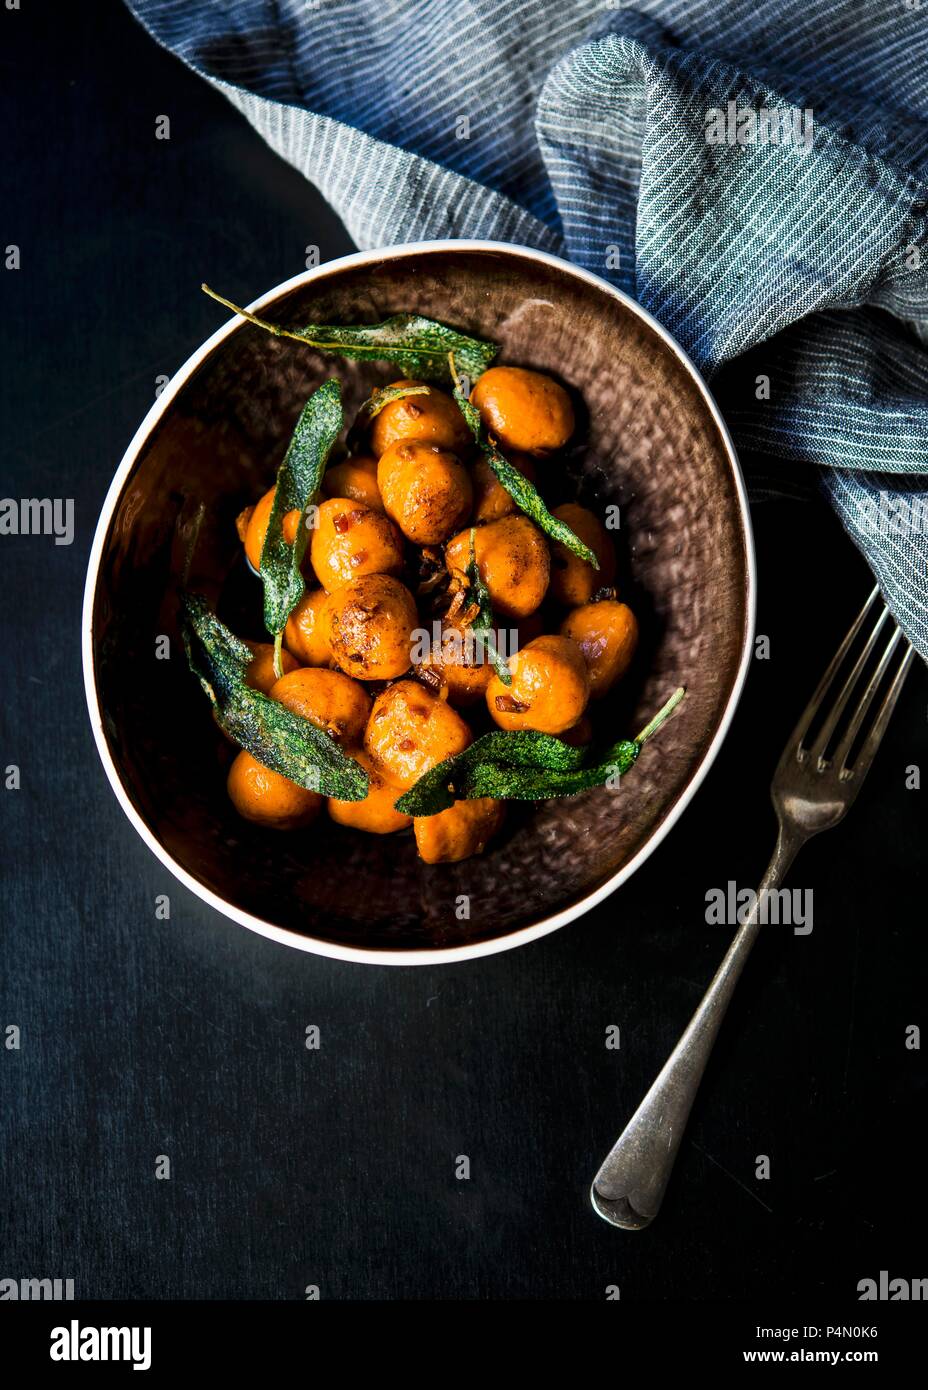 Homemade sweet potato gnocchi tossed in a sage and garlic butter Stock Photo